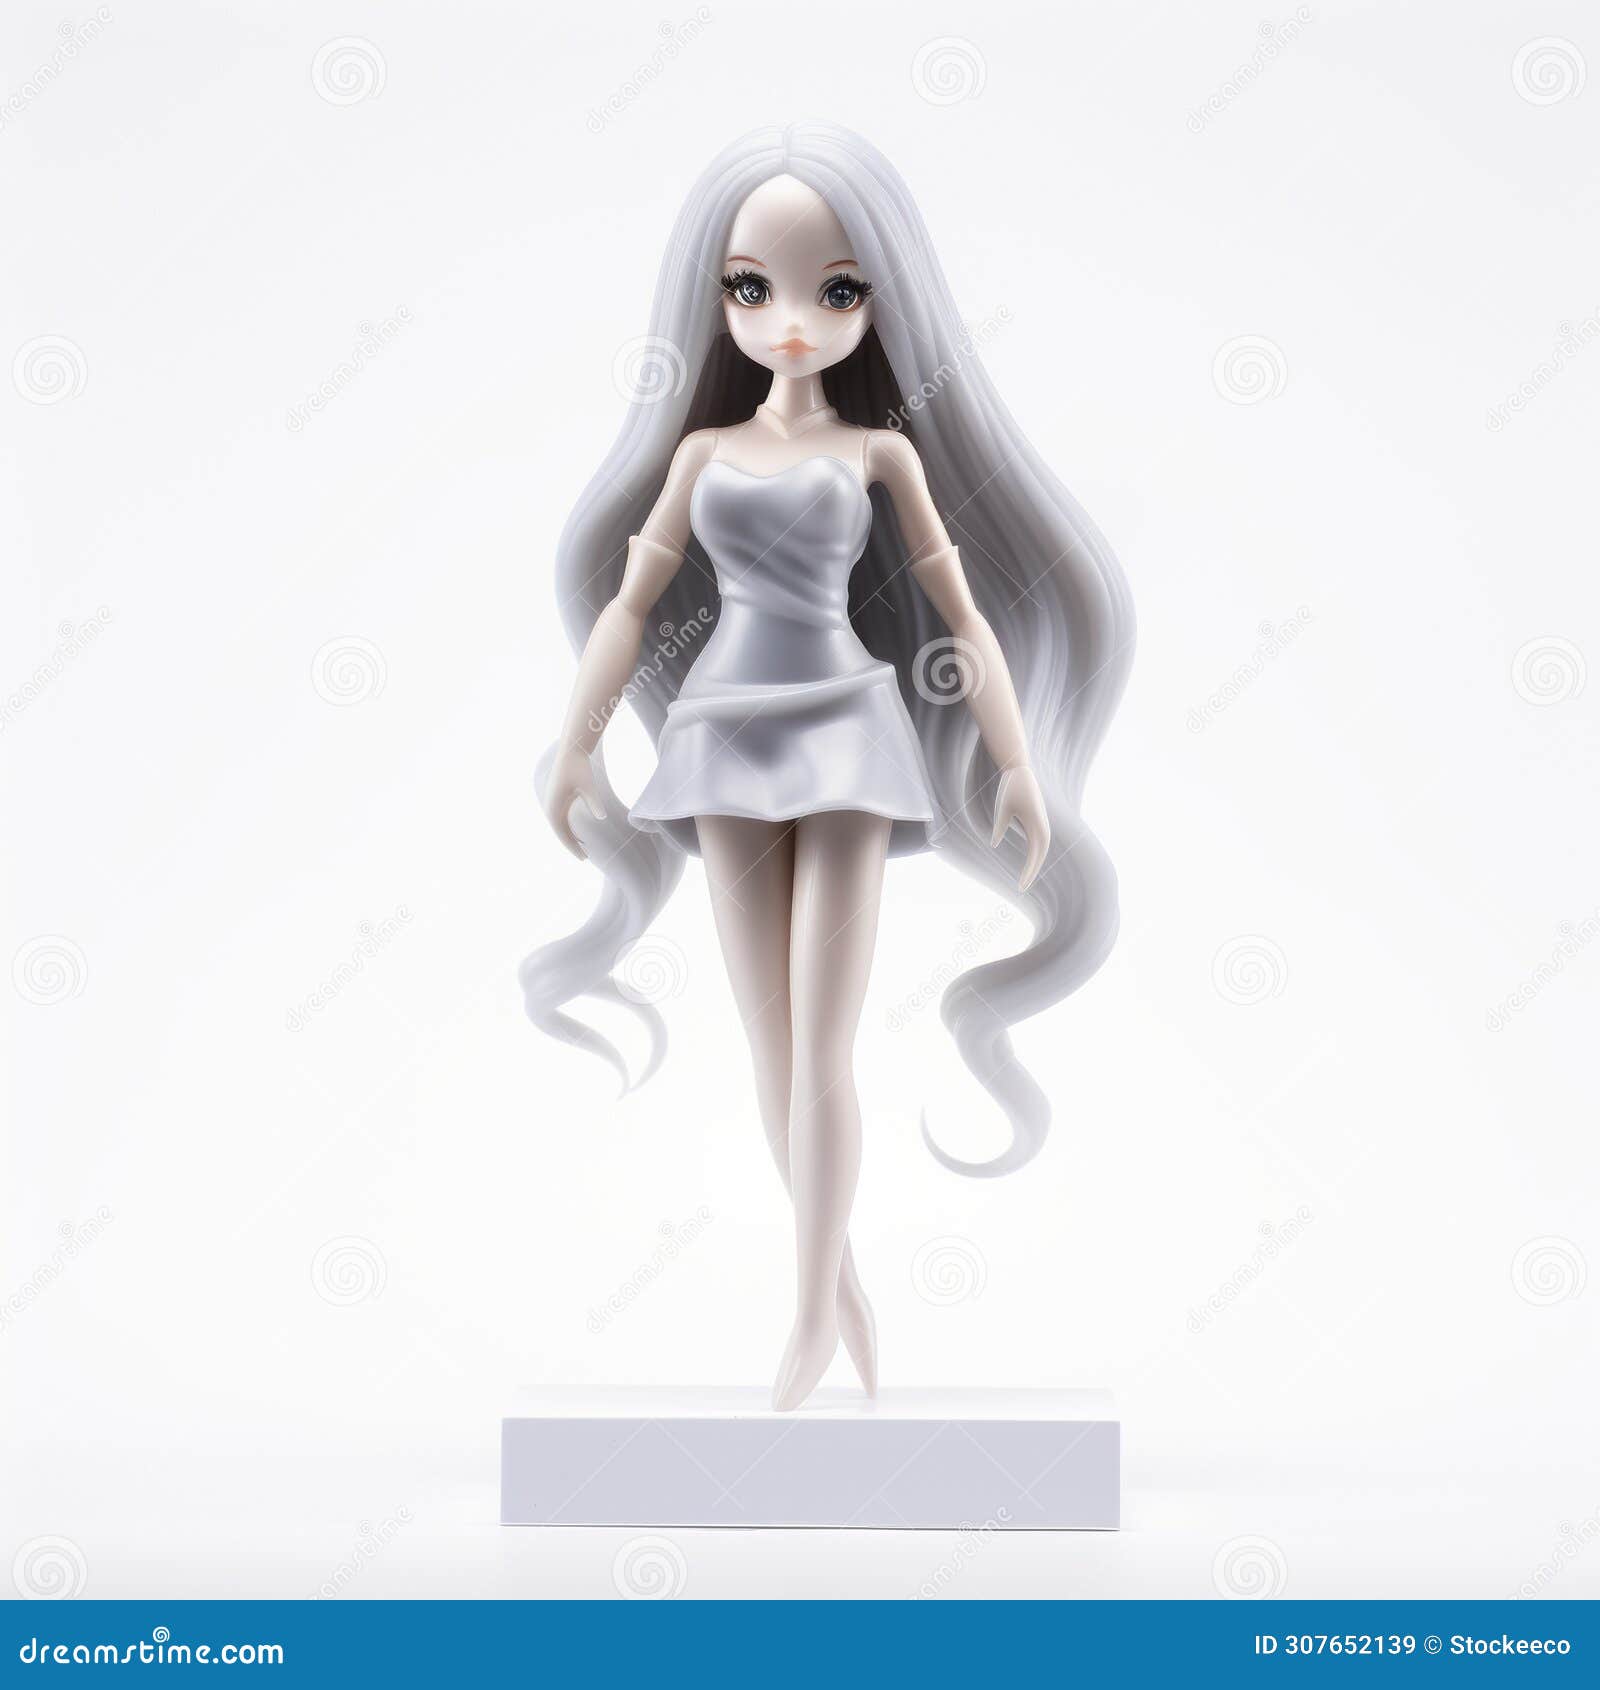 elegant anime figure with long white hair and white dress